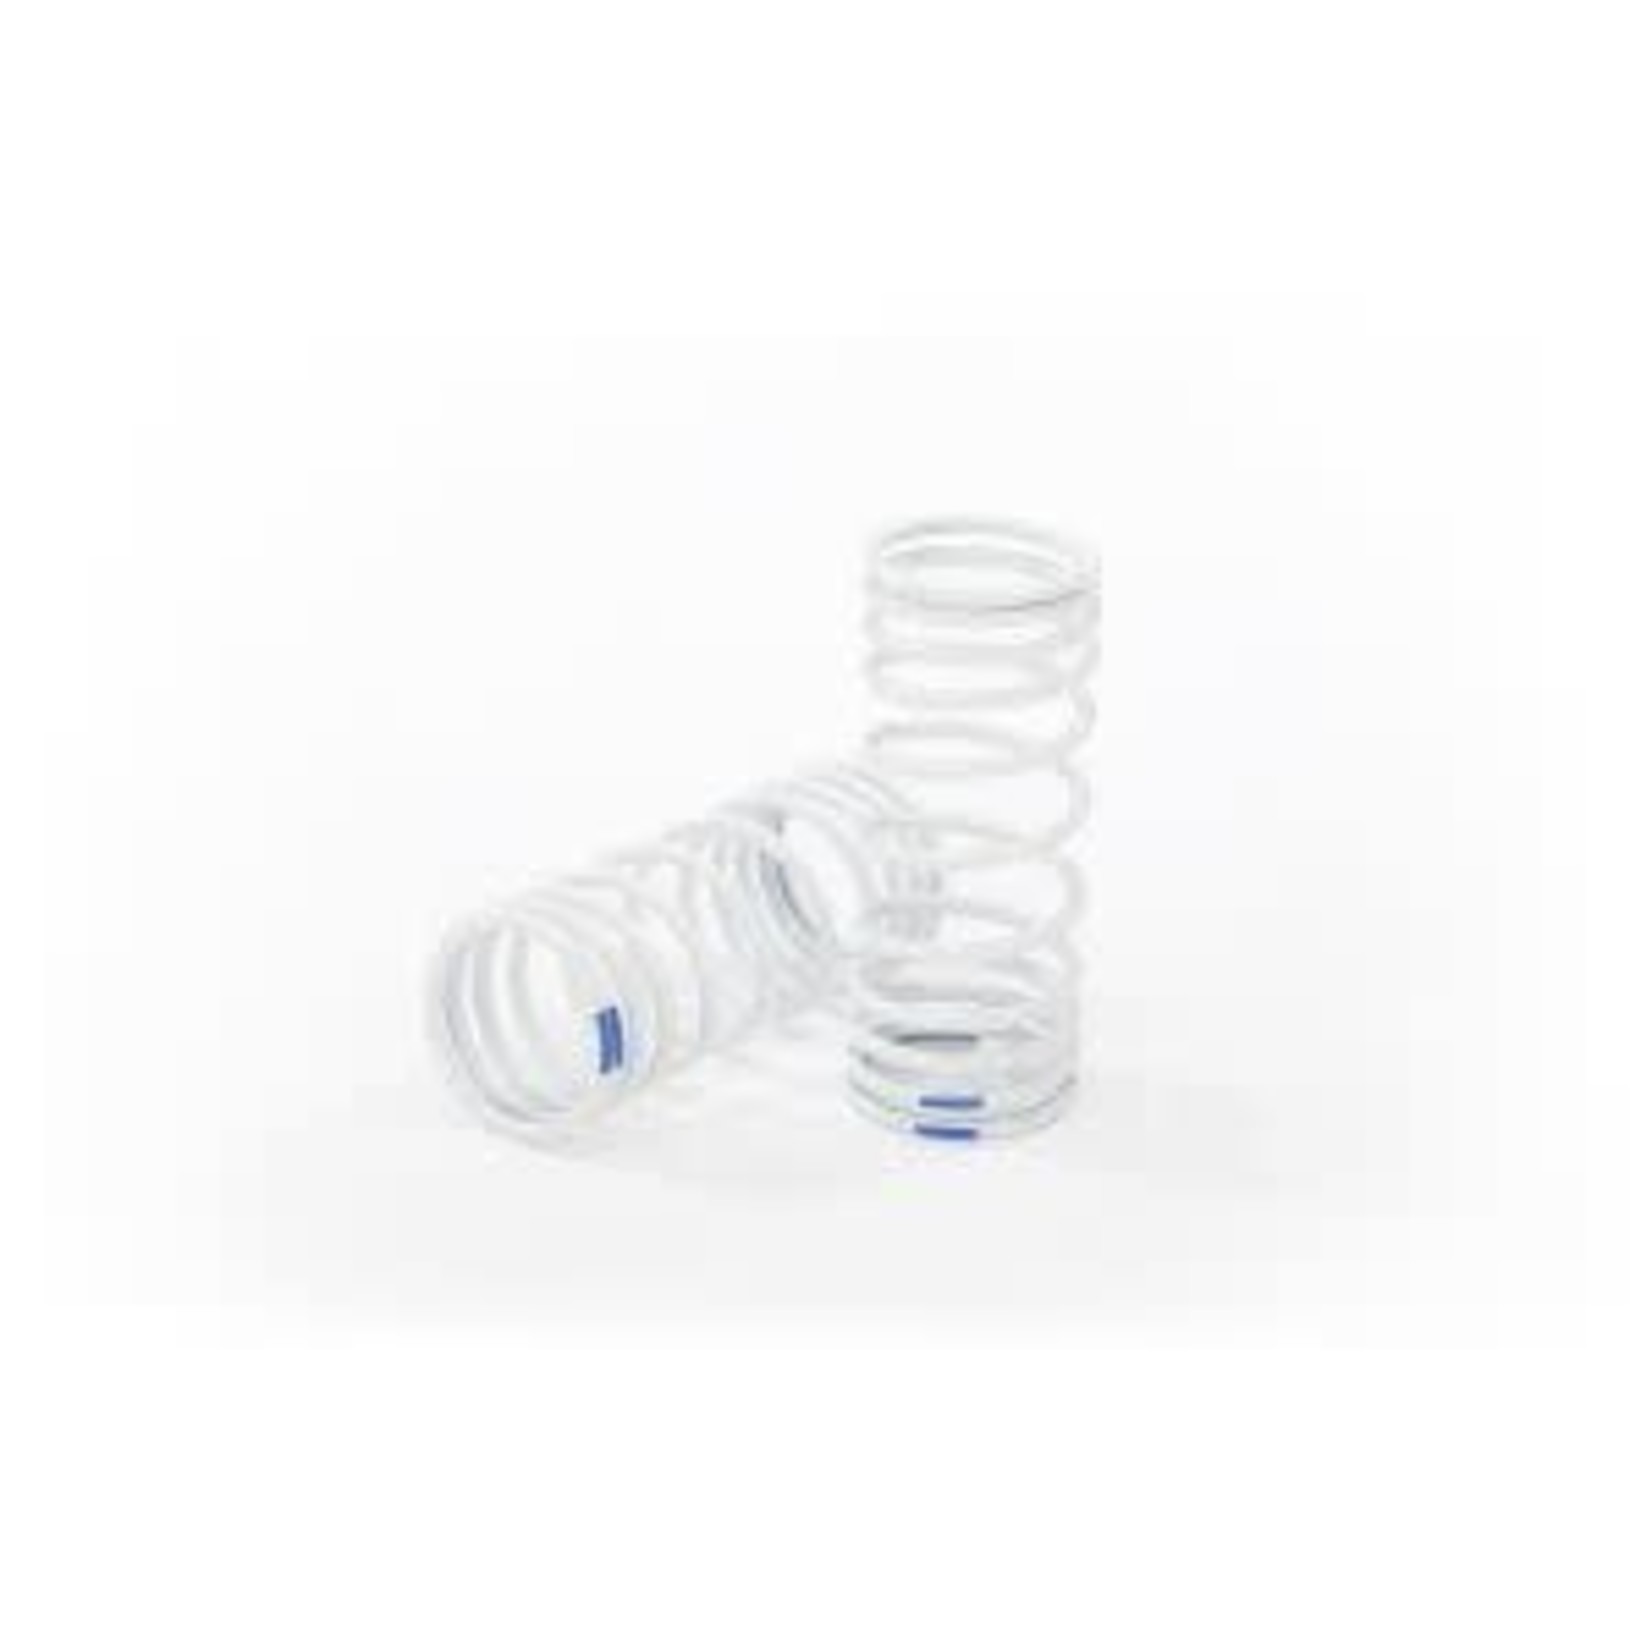 Traxxas 6864 Springs, front (progressive, +20% rate, blue) (2)